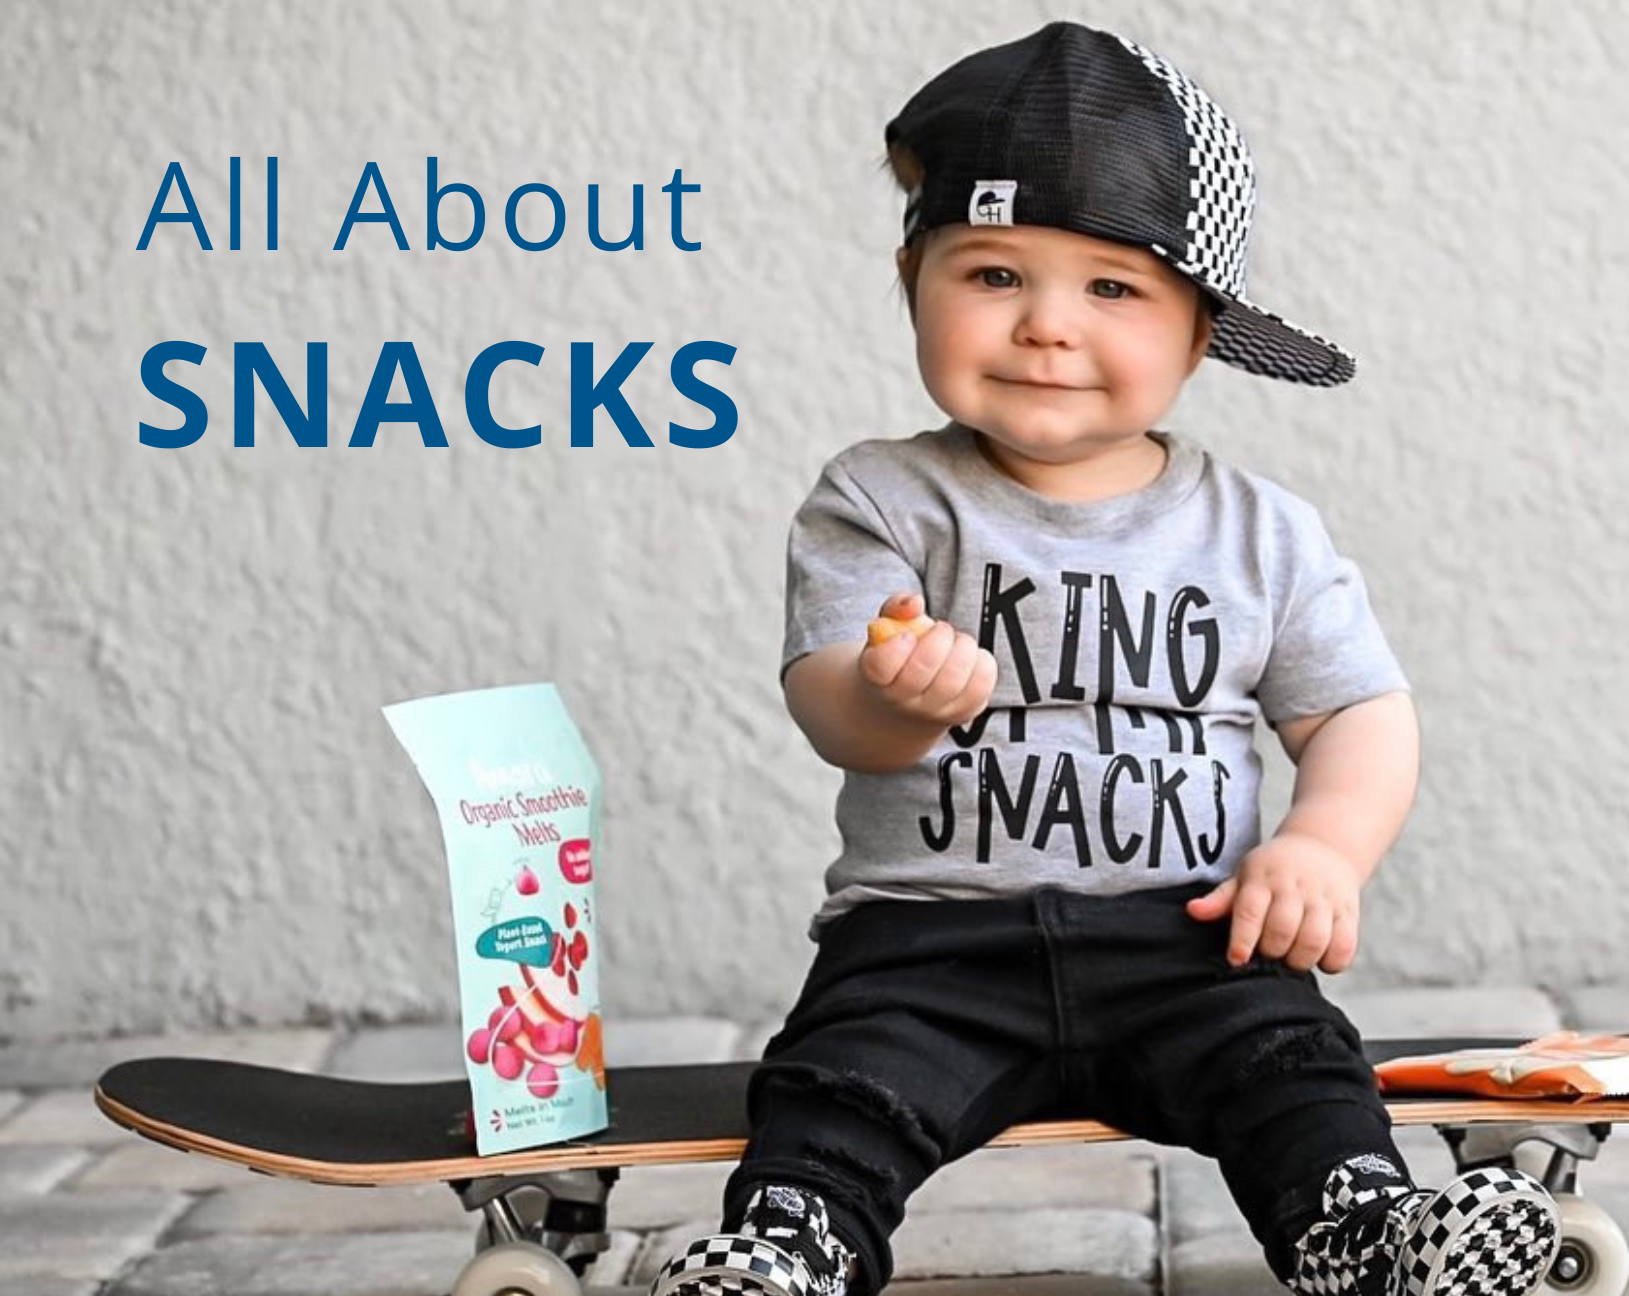 Snacking: The Good, the Bad, and the Ugly 